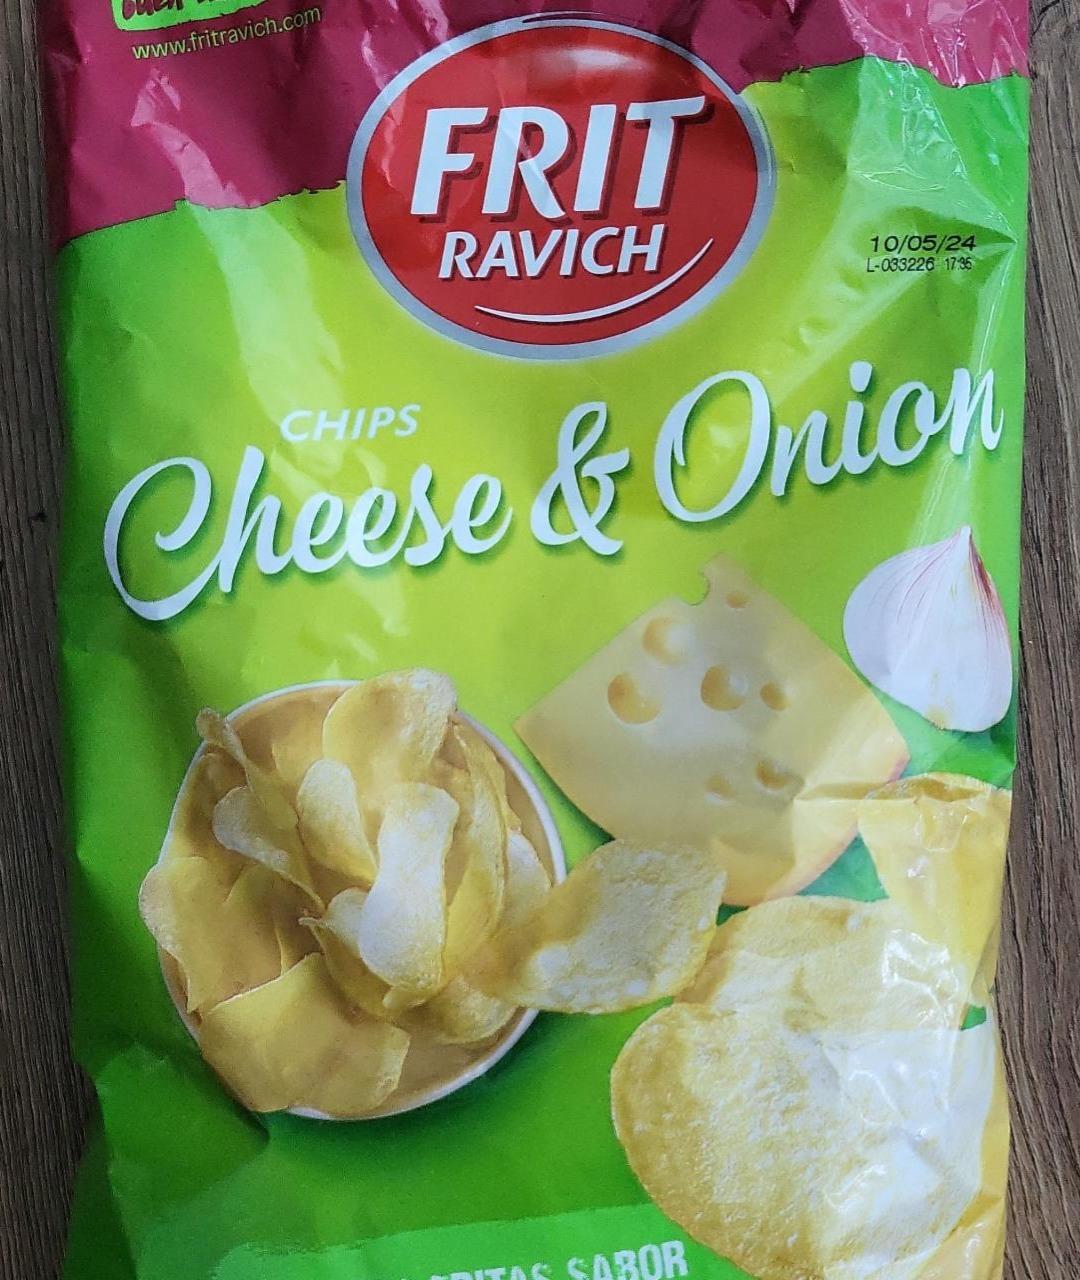 Fotografie - Chips Cheese & Onion Frit Ravich